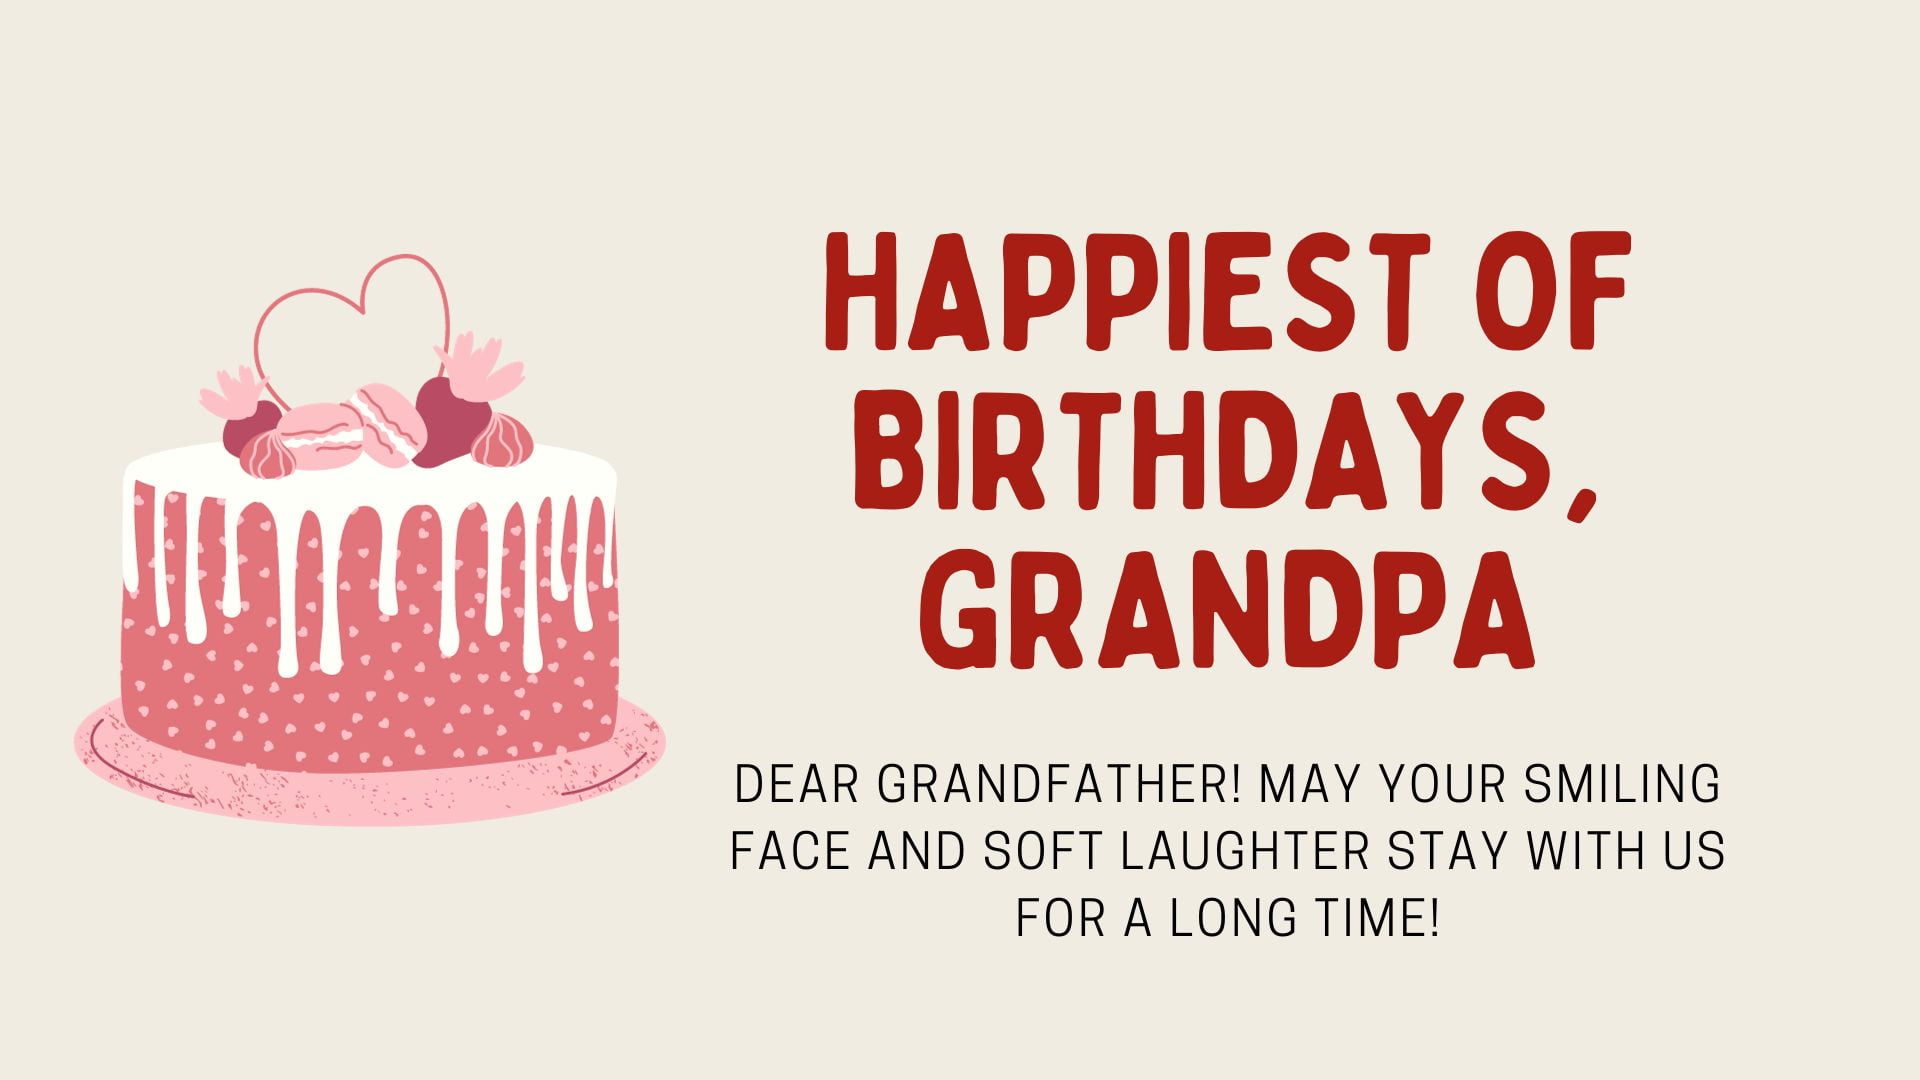 Birthday wishes for Grandfather from granddaughter